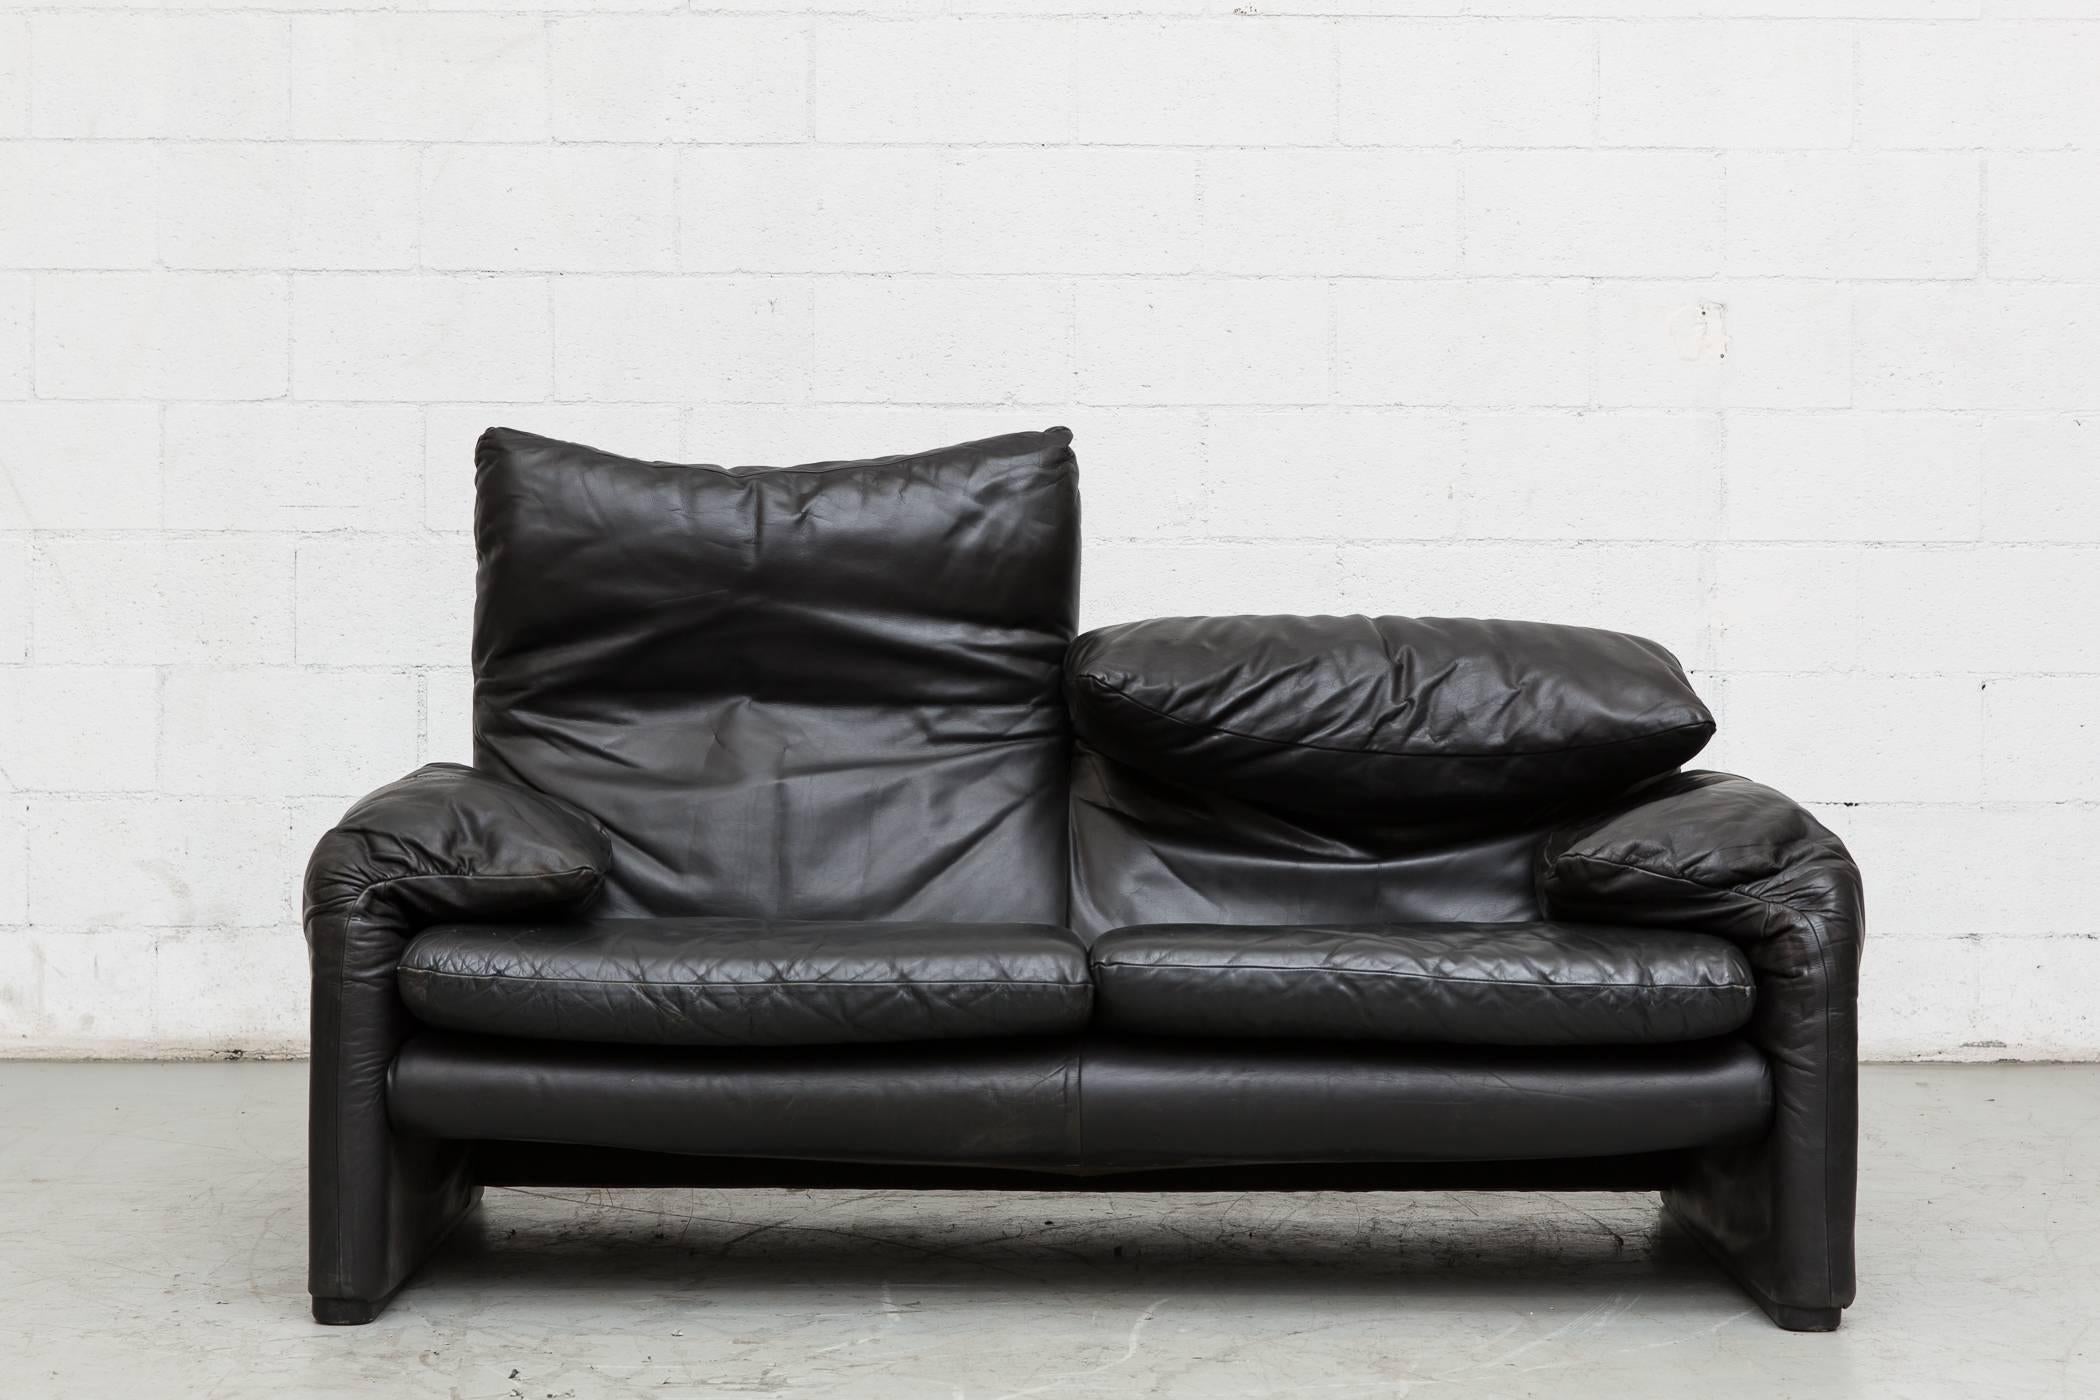 Black leather Maralunga loveseat by Vico Magistretti for Cassina in good original condition with visible patina, light scratching and wear consistent with its age and usage.